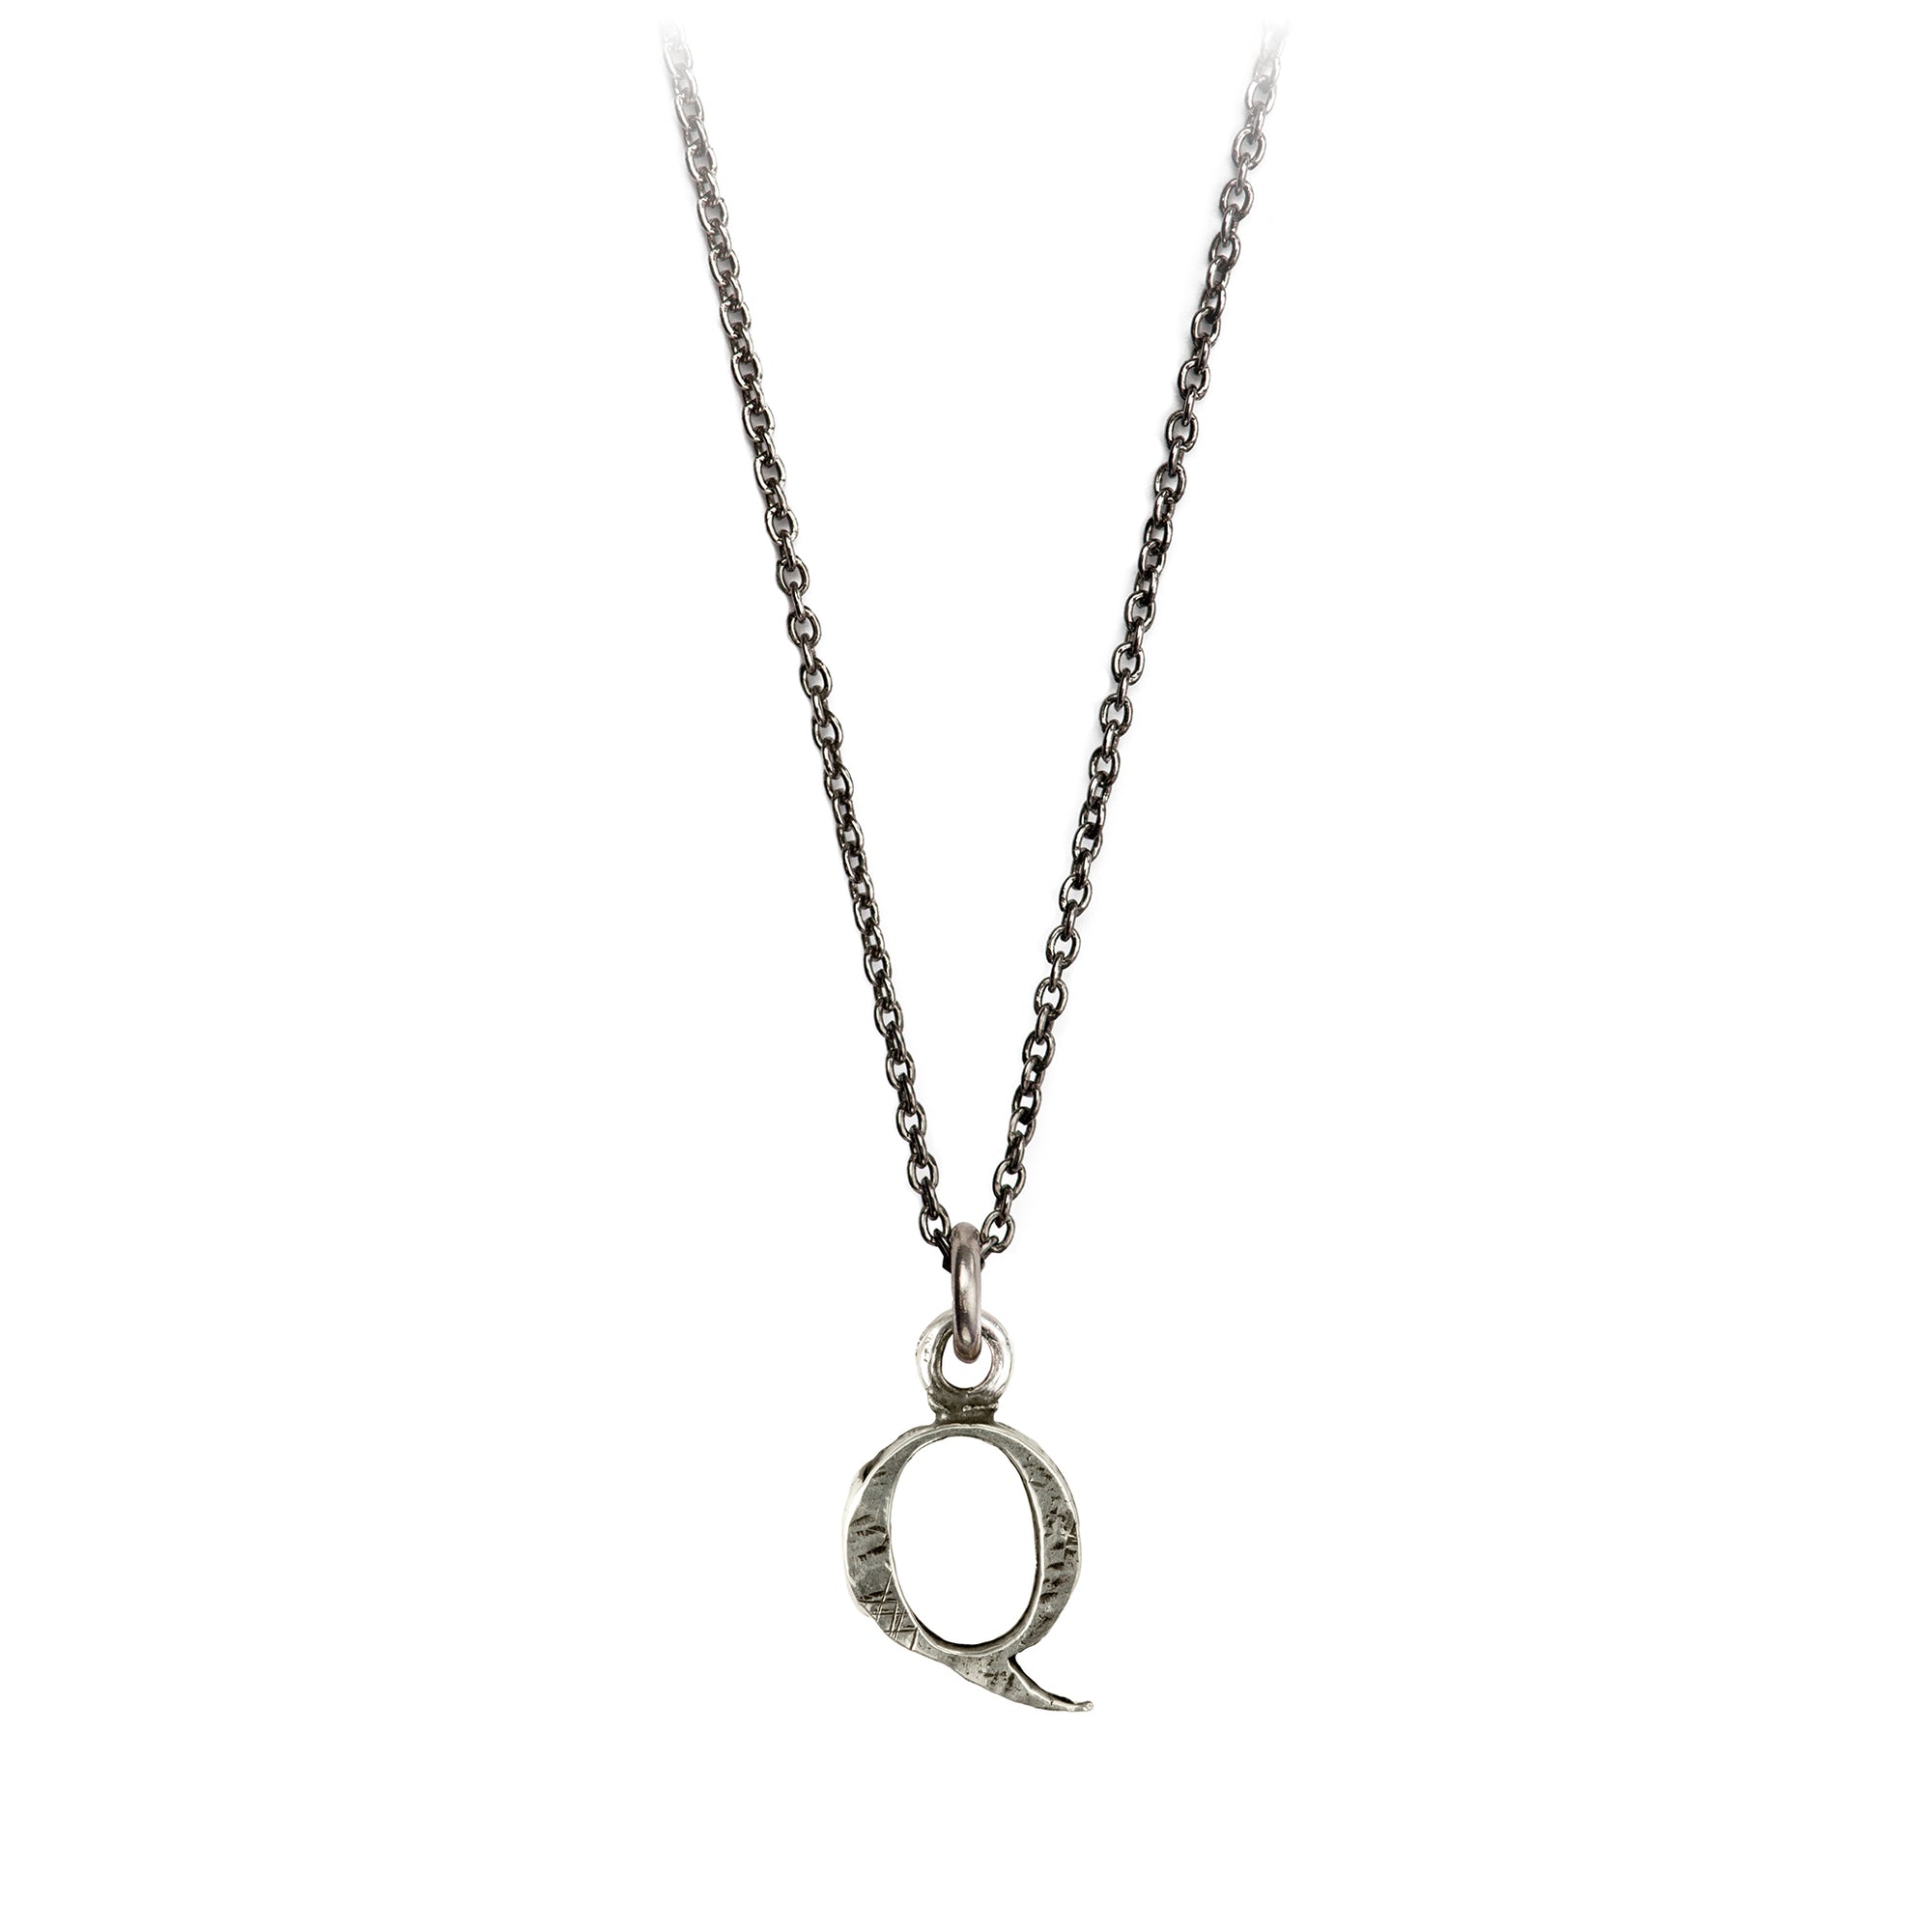 A sterling silver letter "Q" charm on a silver chain.